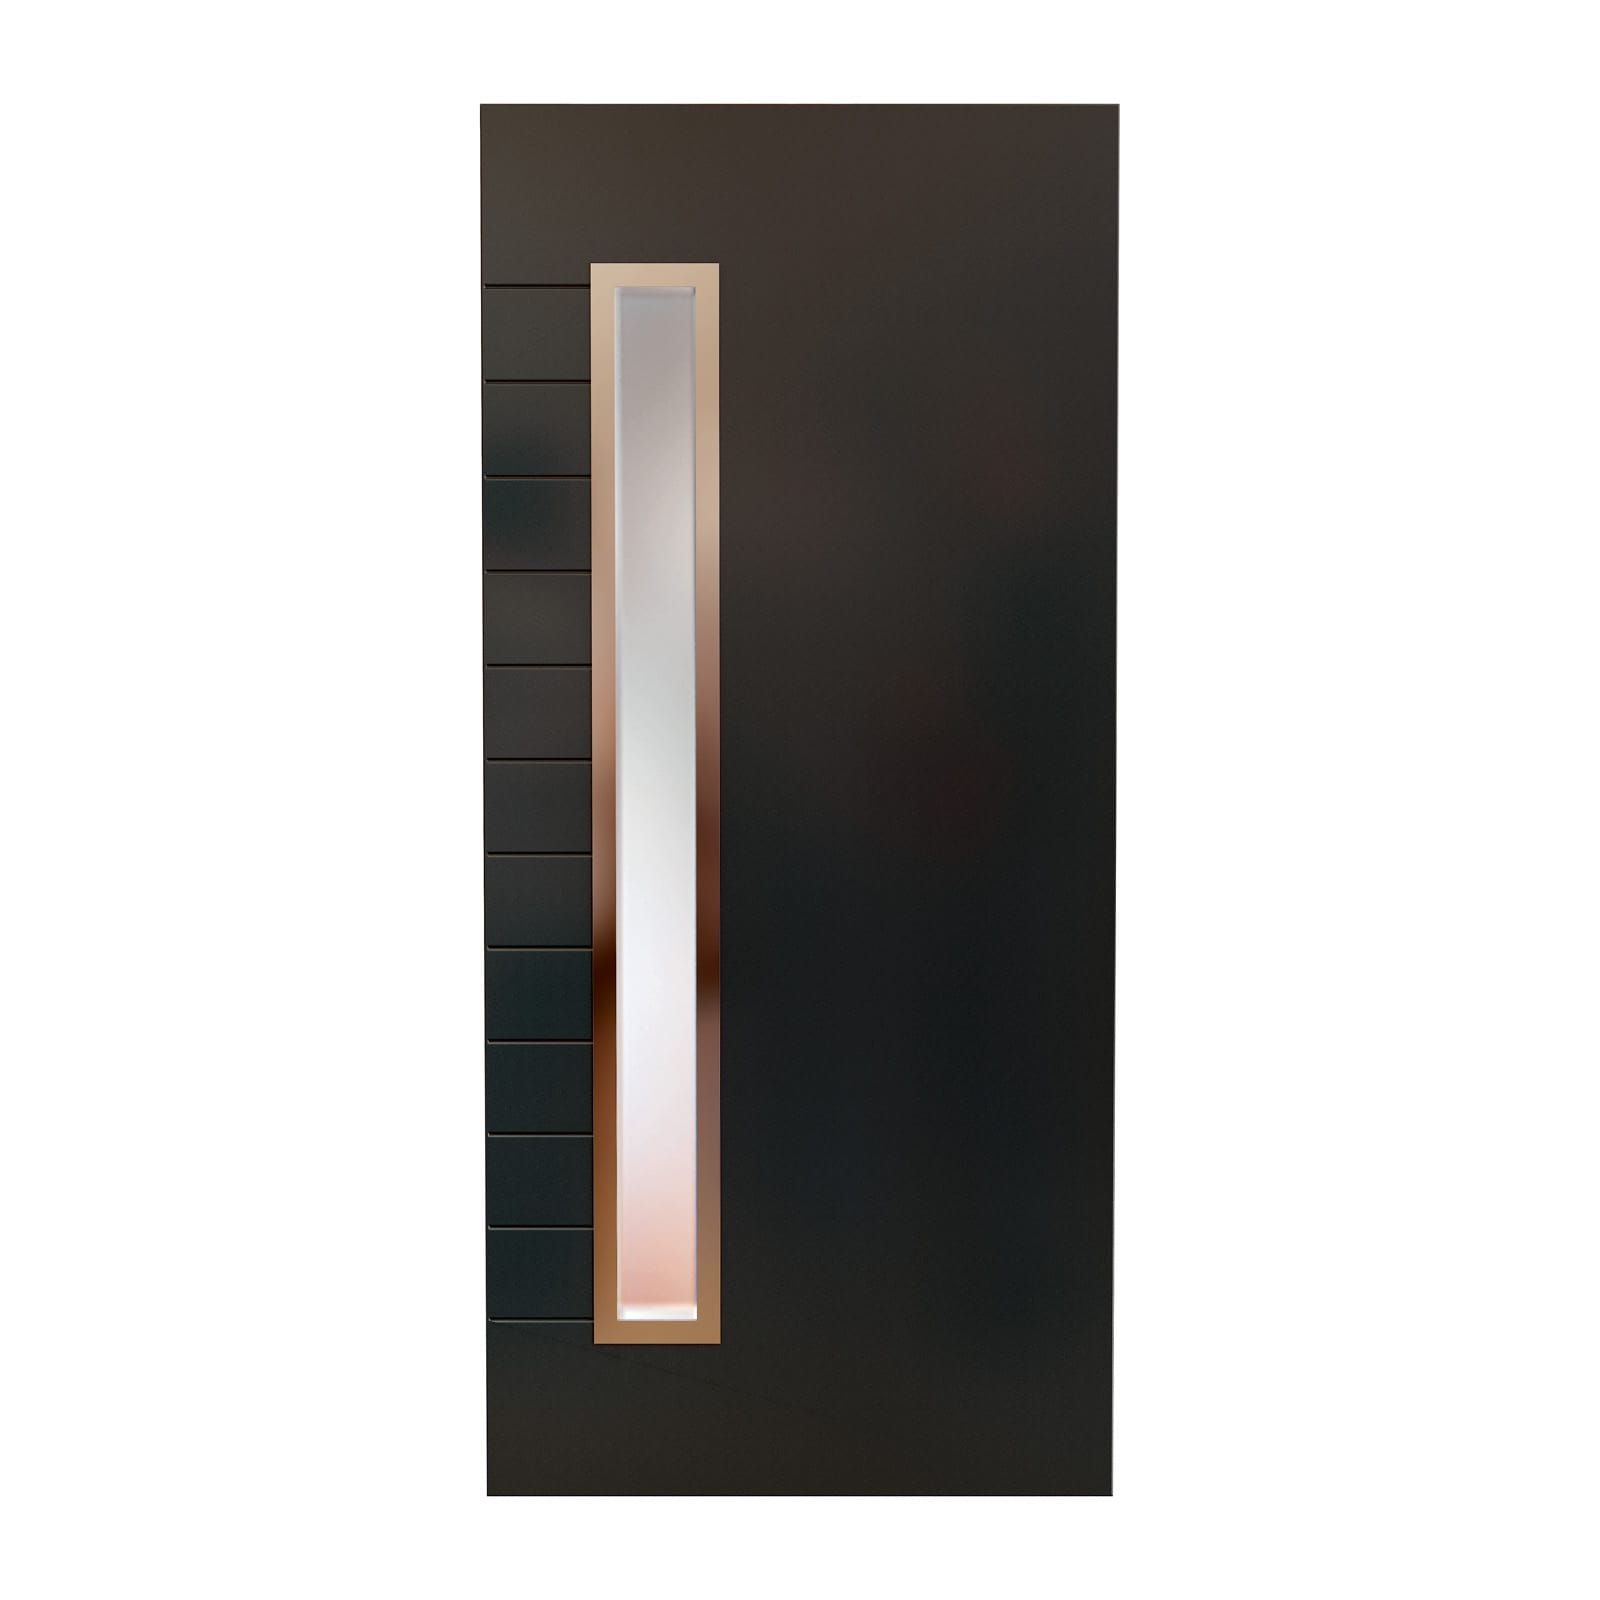 Alitherm 400 Door with PM0006T panel